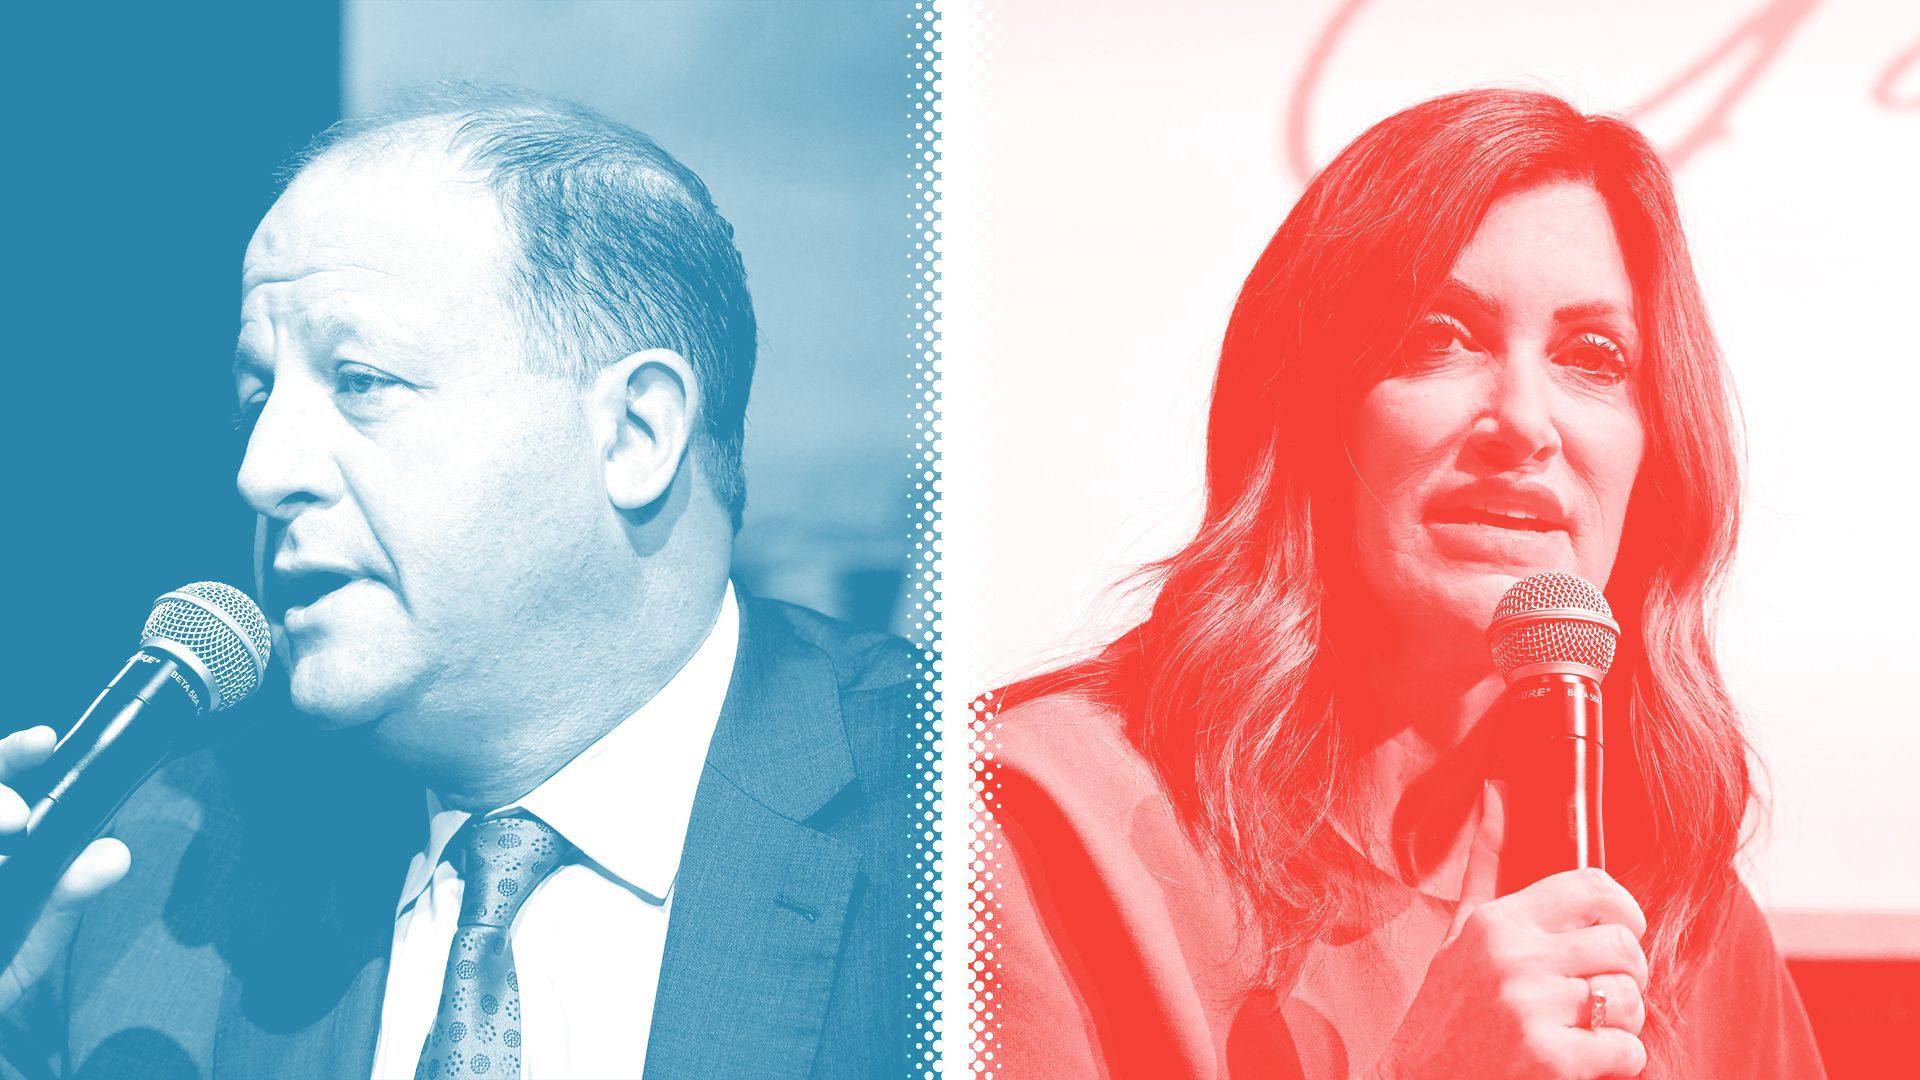 Photo illustration of Jared Polis, tinted blue, and Heidi Ganahl, tinted red, separated by a white halftone divider.